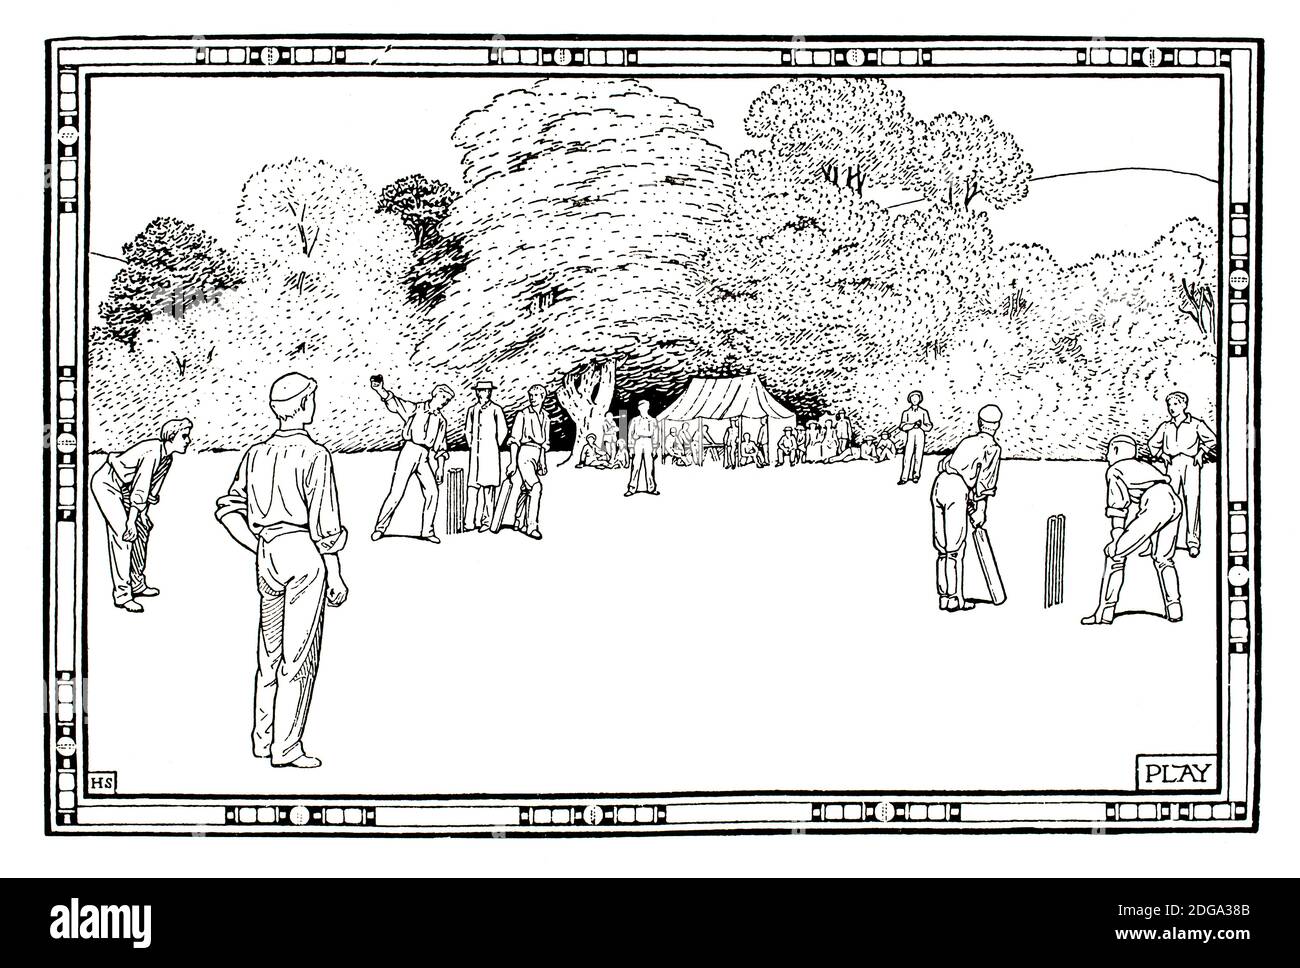 Play, late Victorian club cricket game, Fitzroy Pictures illustration by Heywood Sumner from 1896 The Studio an Illustrated Magazine of Fine and Appli Stock Photo